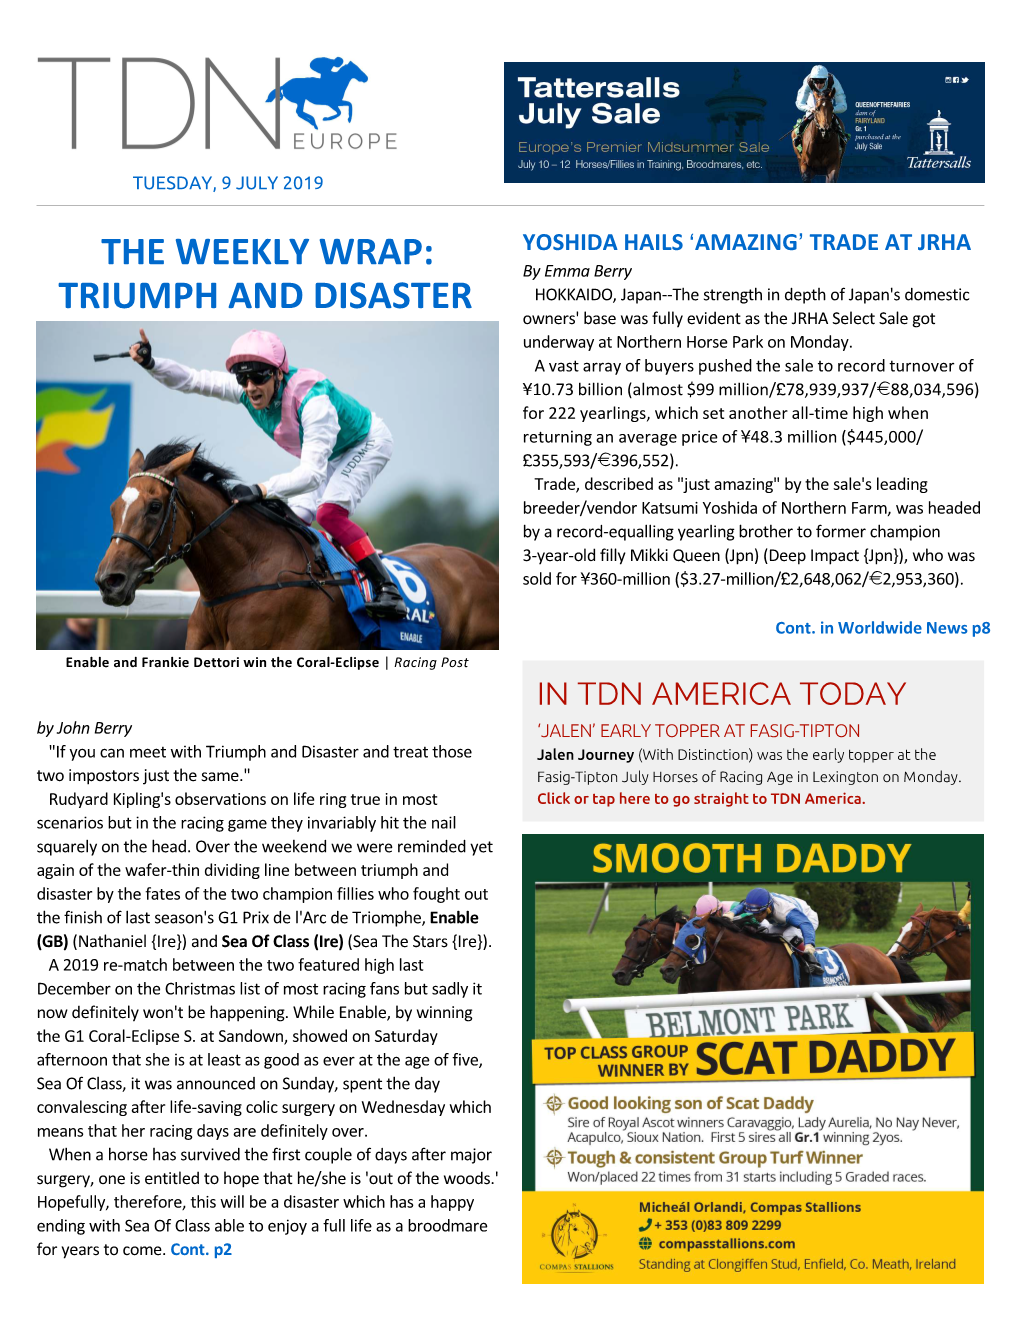 The Weekly Wrap: Triumph and Disaster